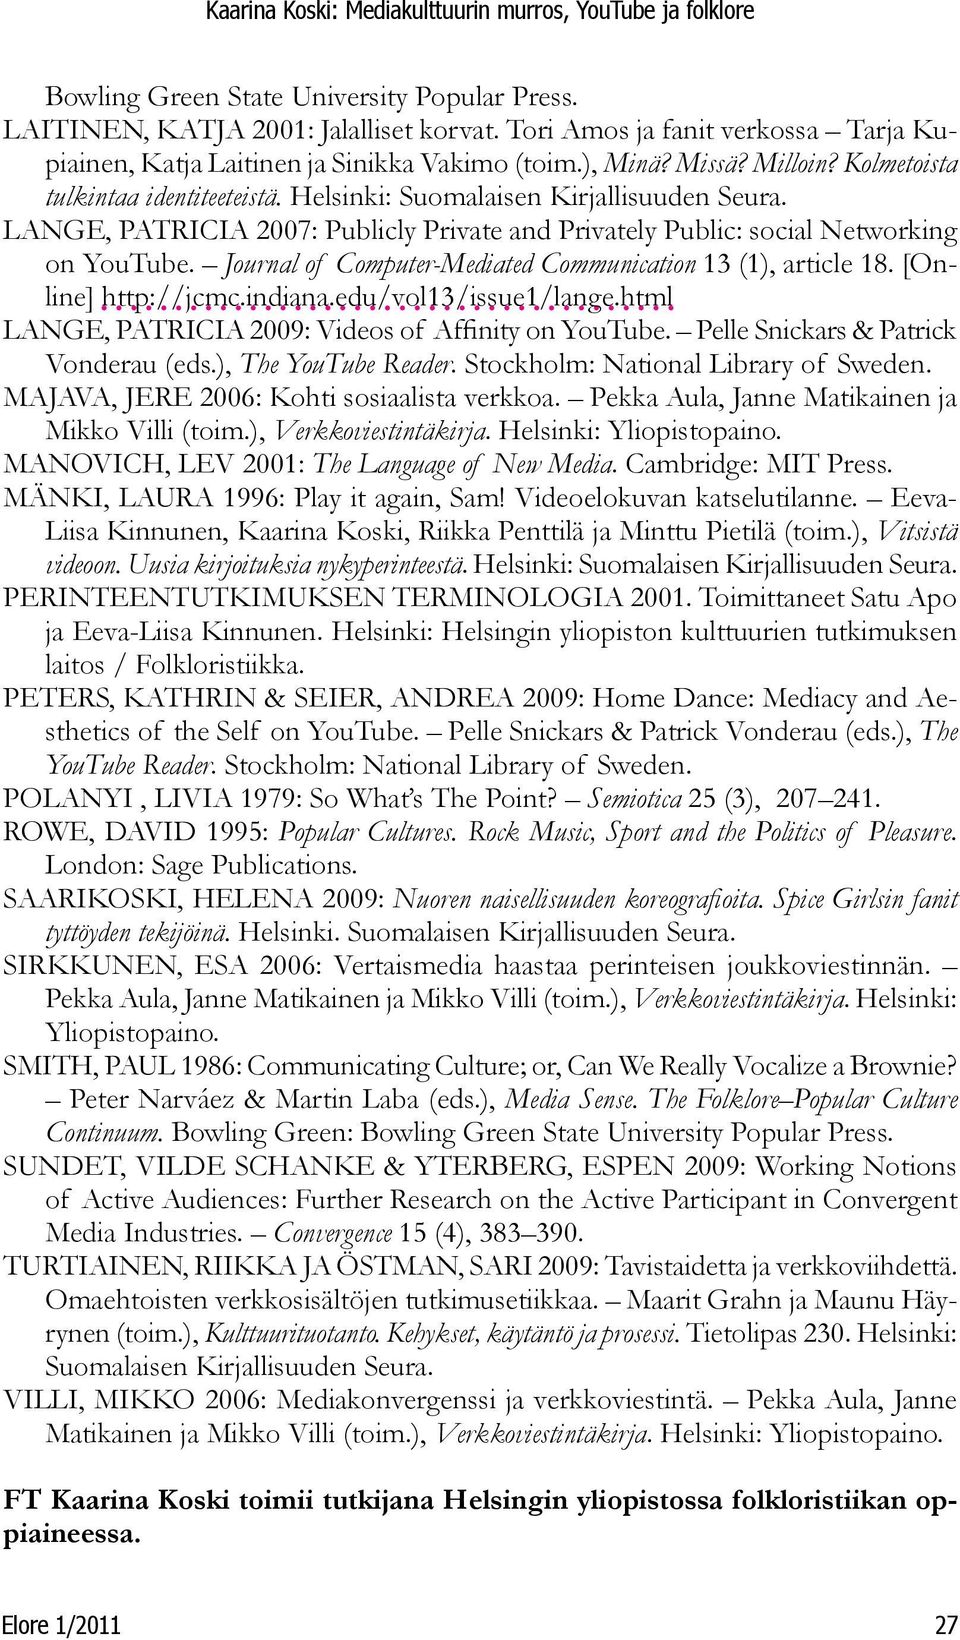 Journal of Computer-Mediated Communication 13 (1), article 18. [Online] http://jcmc.indiana.edu/vol13/issue1/lange.html LANGE, PATRICIA 2009: Videos of Affinity on YouTube.